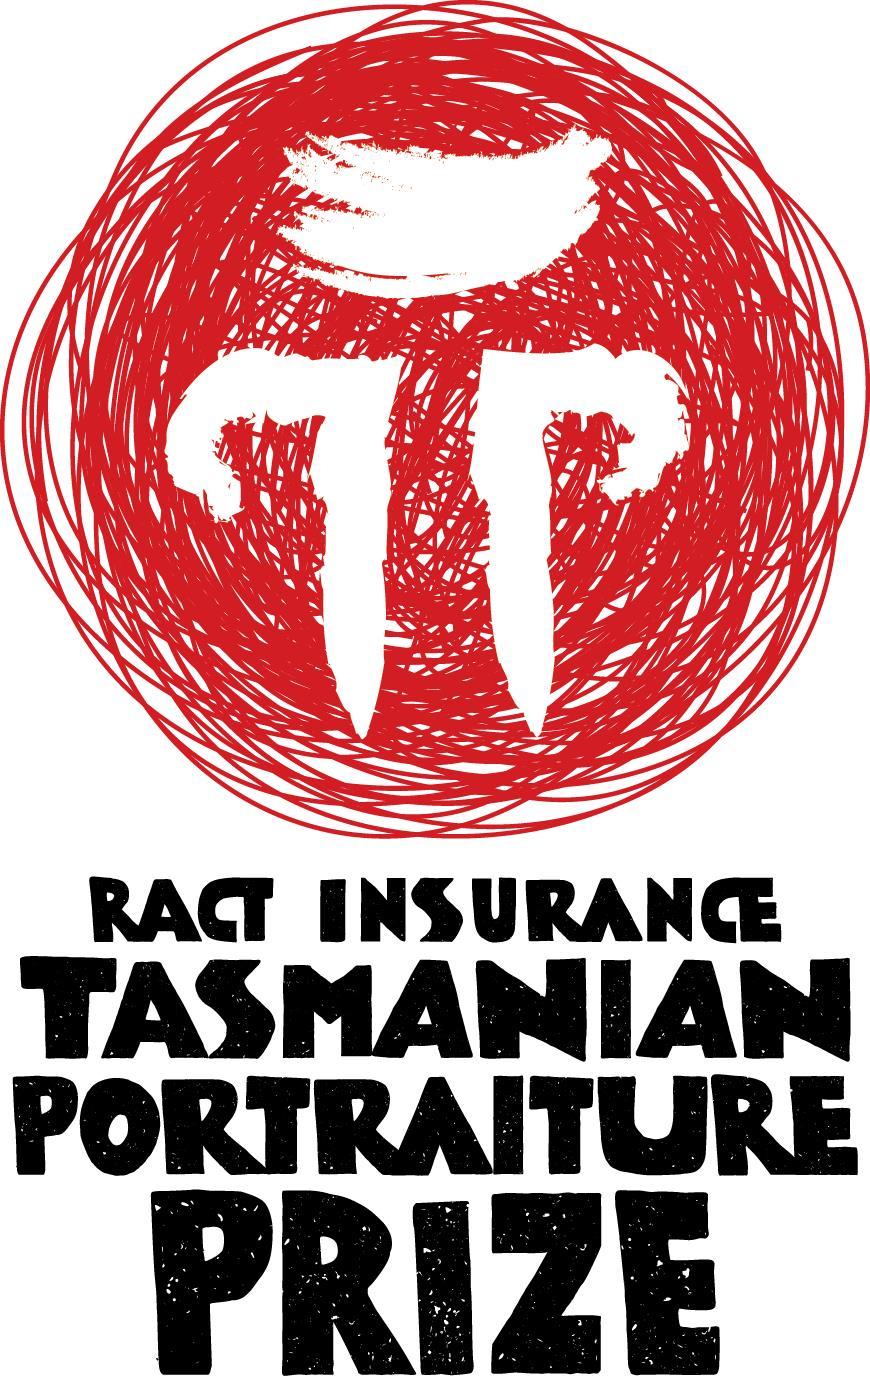 31 October 22 FRONT GALLERY & MIDDLE GALLERY 2014 RACT Insurance Tasmanian Portraiture